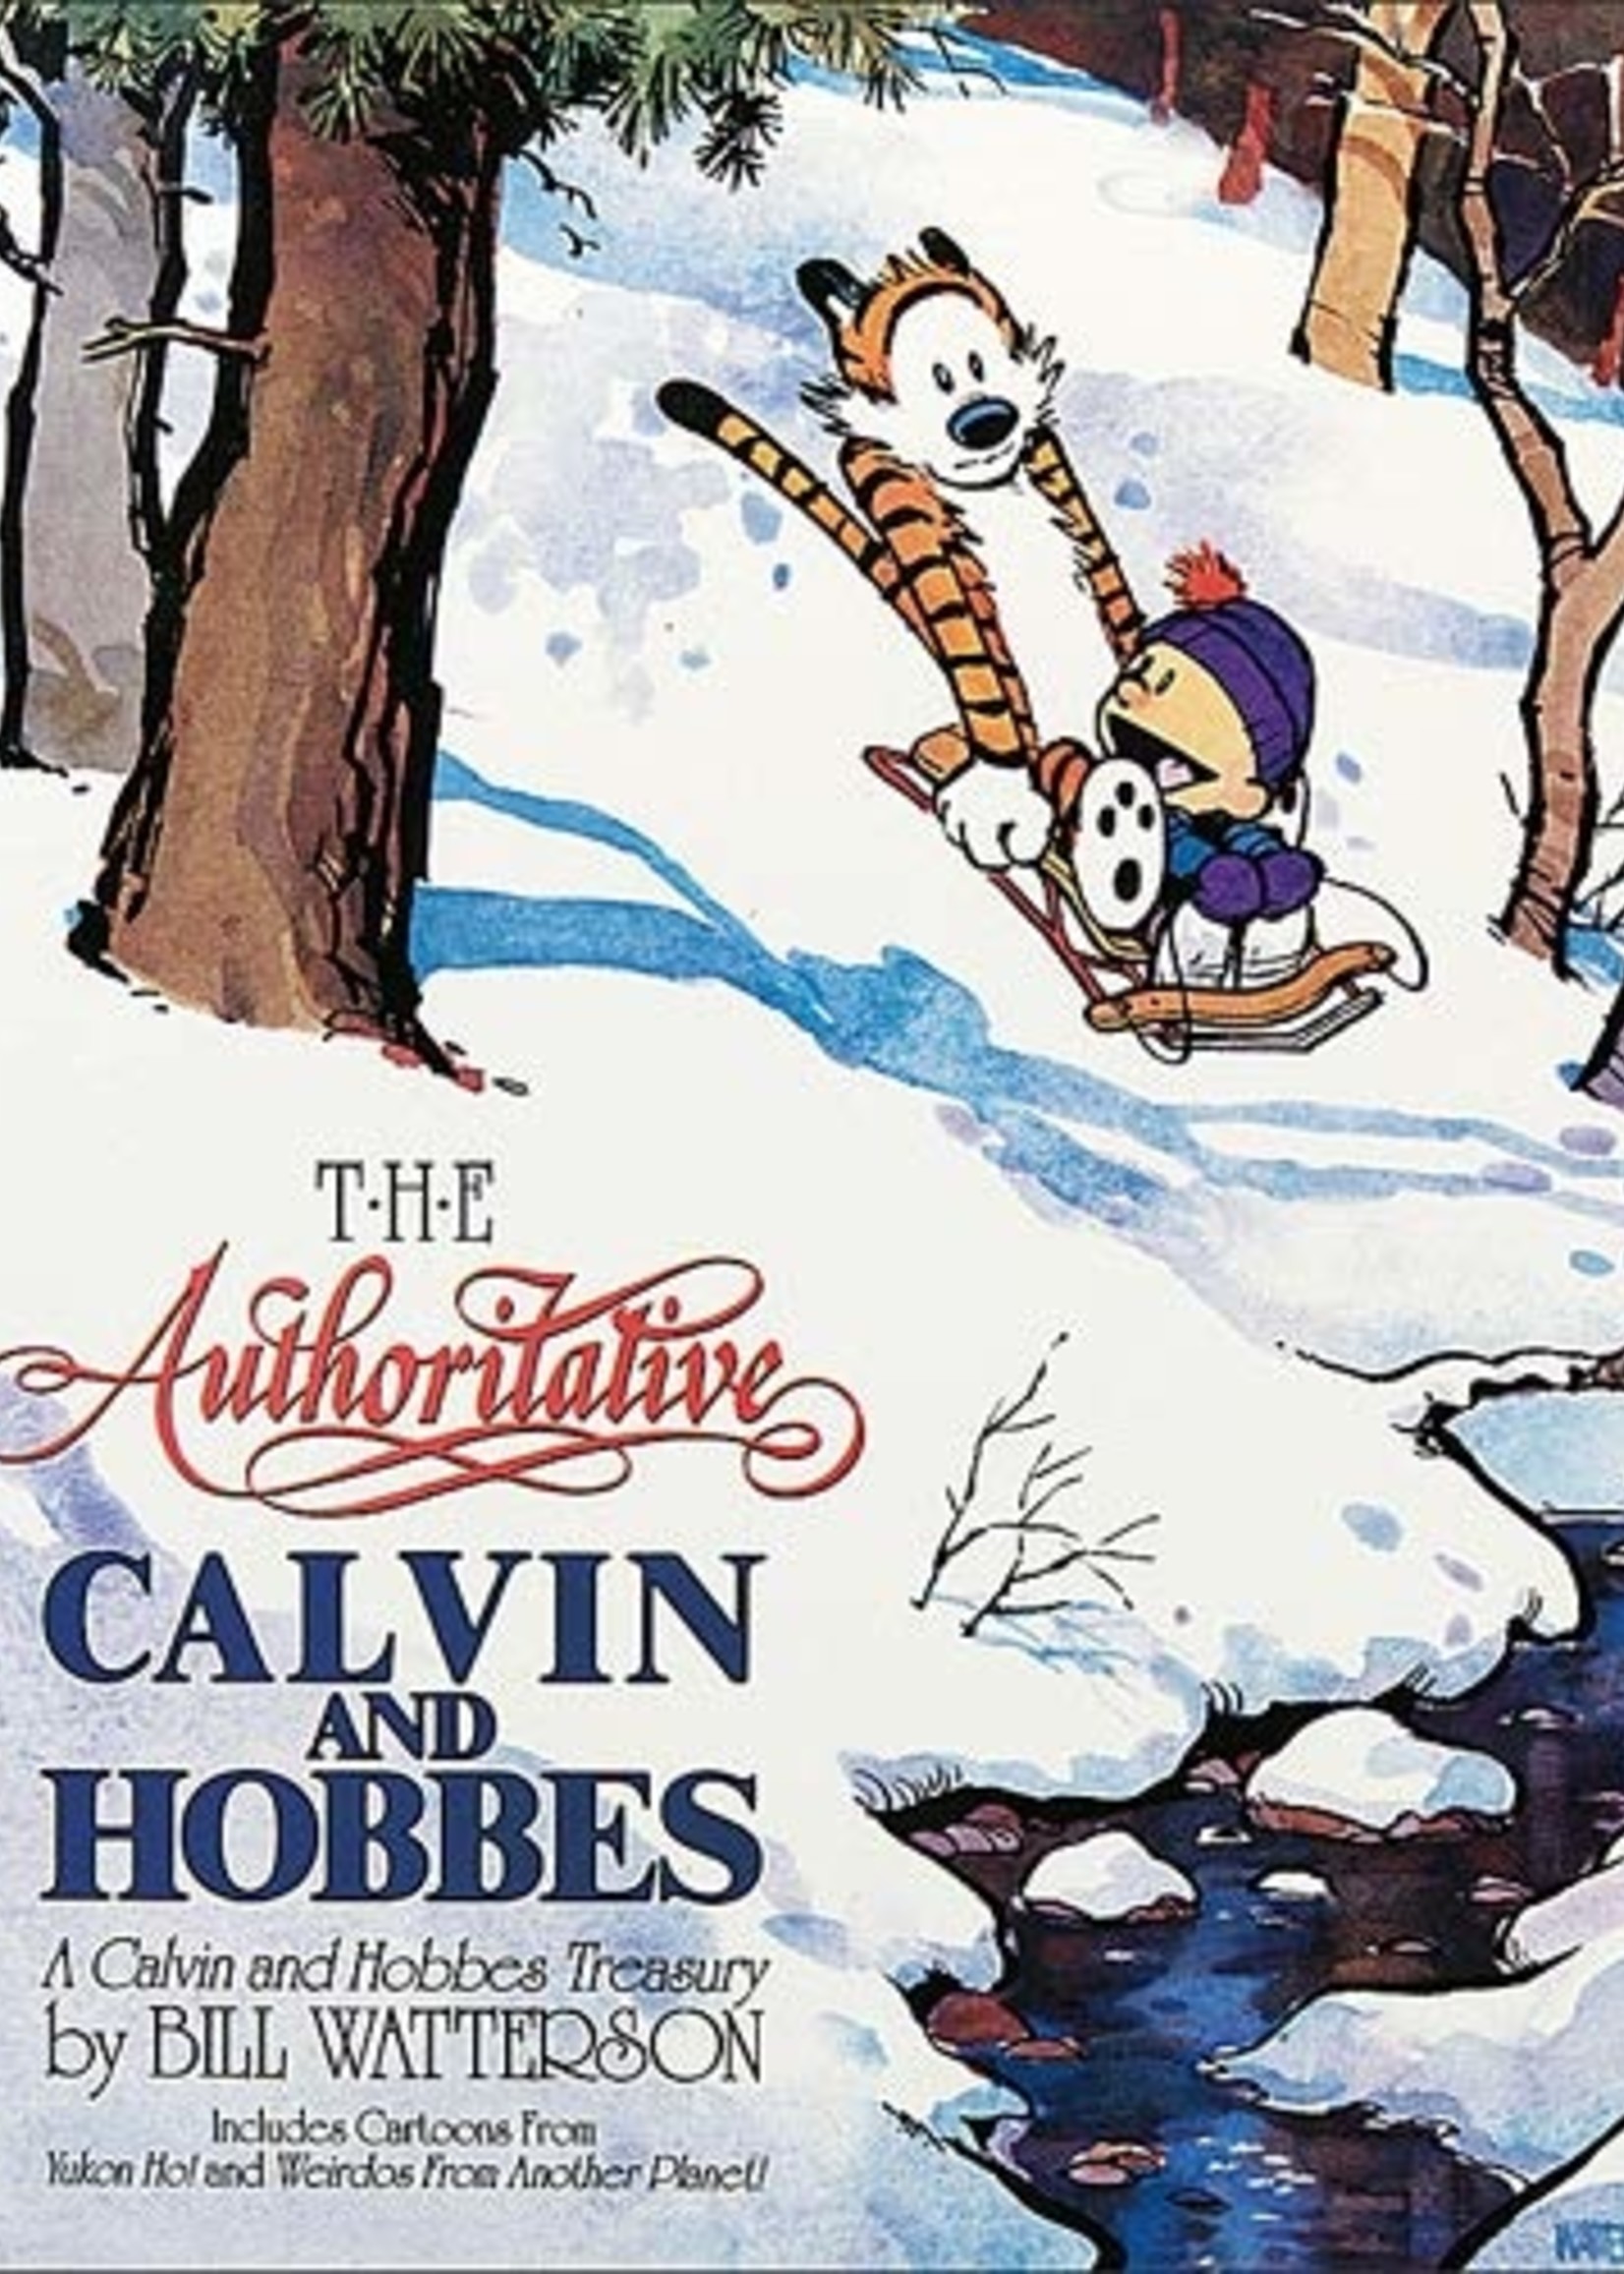 Calvin and Hobbes Compendium #2, The Authoritative Calvin and Hobbes - Paperback